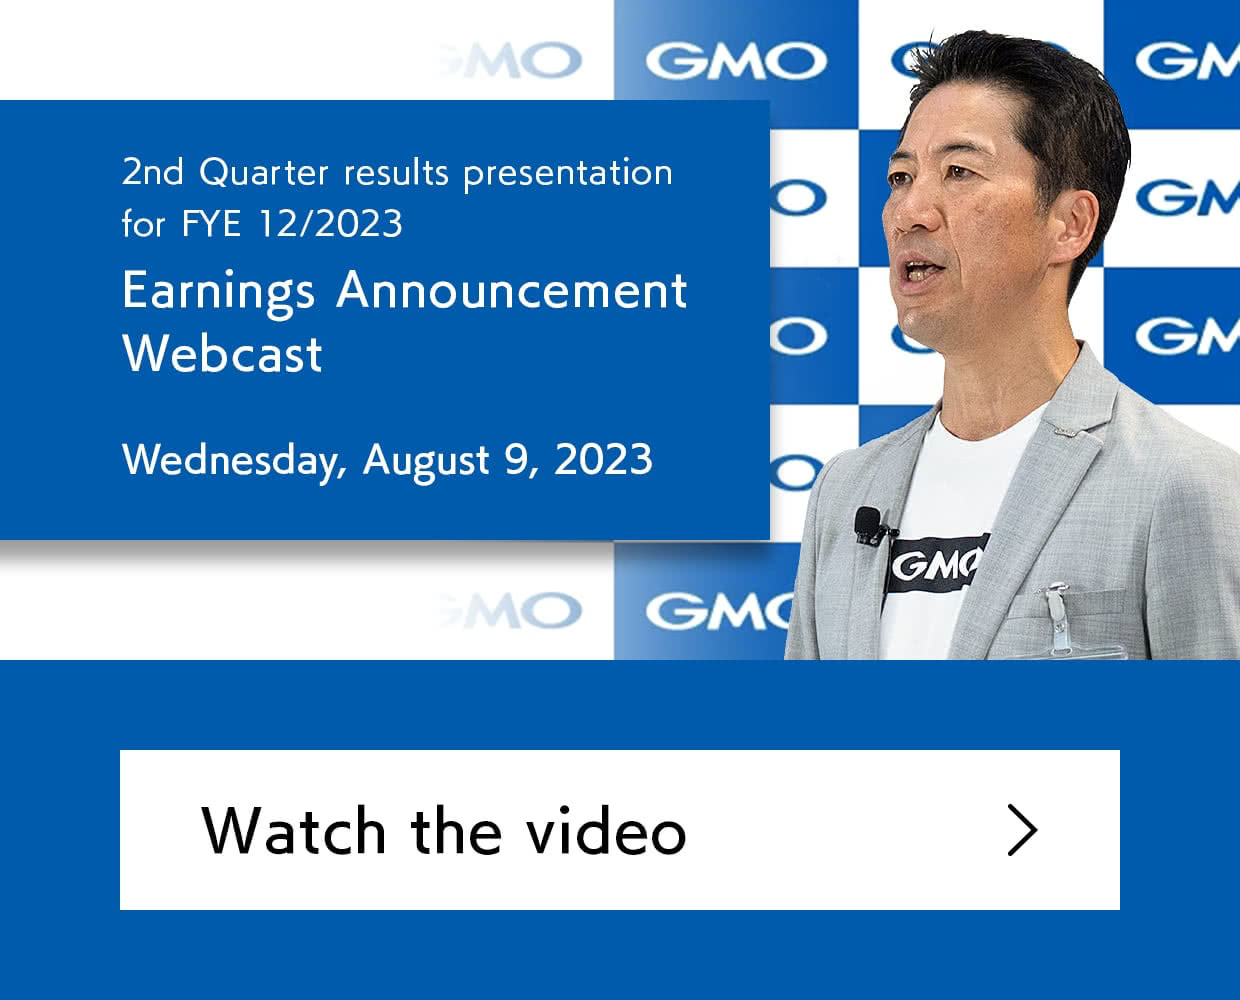 2nd Quarter, Fiscal Year 2023 Earnings Announcement Webcast